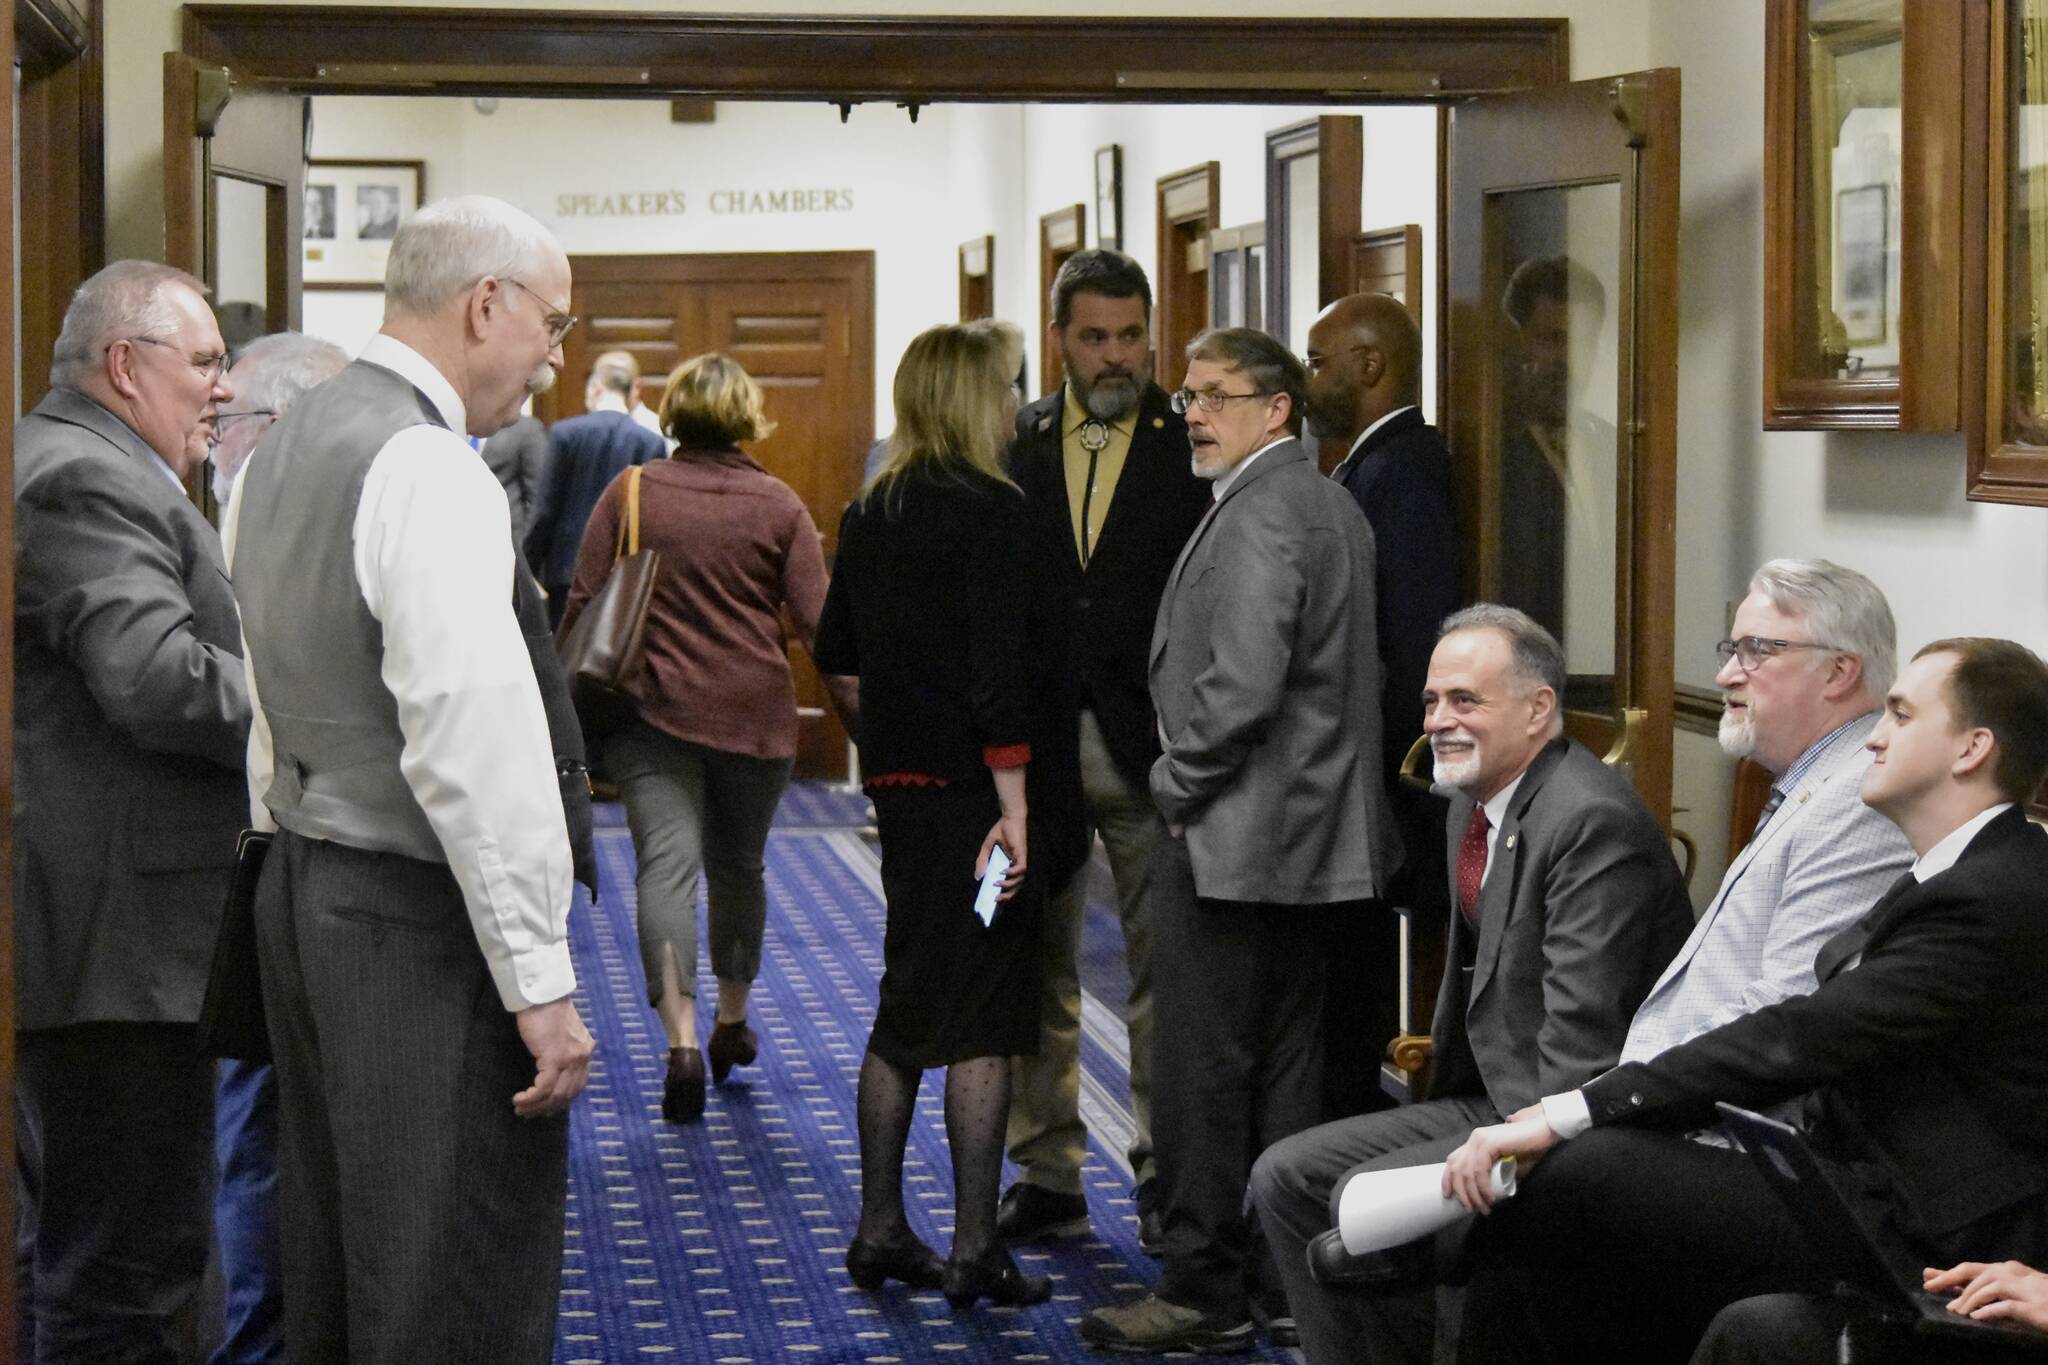 Lawmakers from both bodies of the Alaska State Legislature mingle in the halls of the Alaska State Capitol on Wednesday, May 18, 2022, the last day of the legislative session, following the Senate’s passing of the state’s budget bill. (Peter Segall / Juneau Empire)